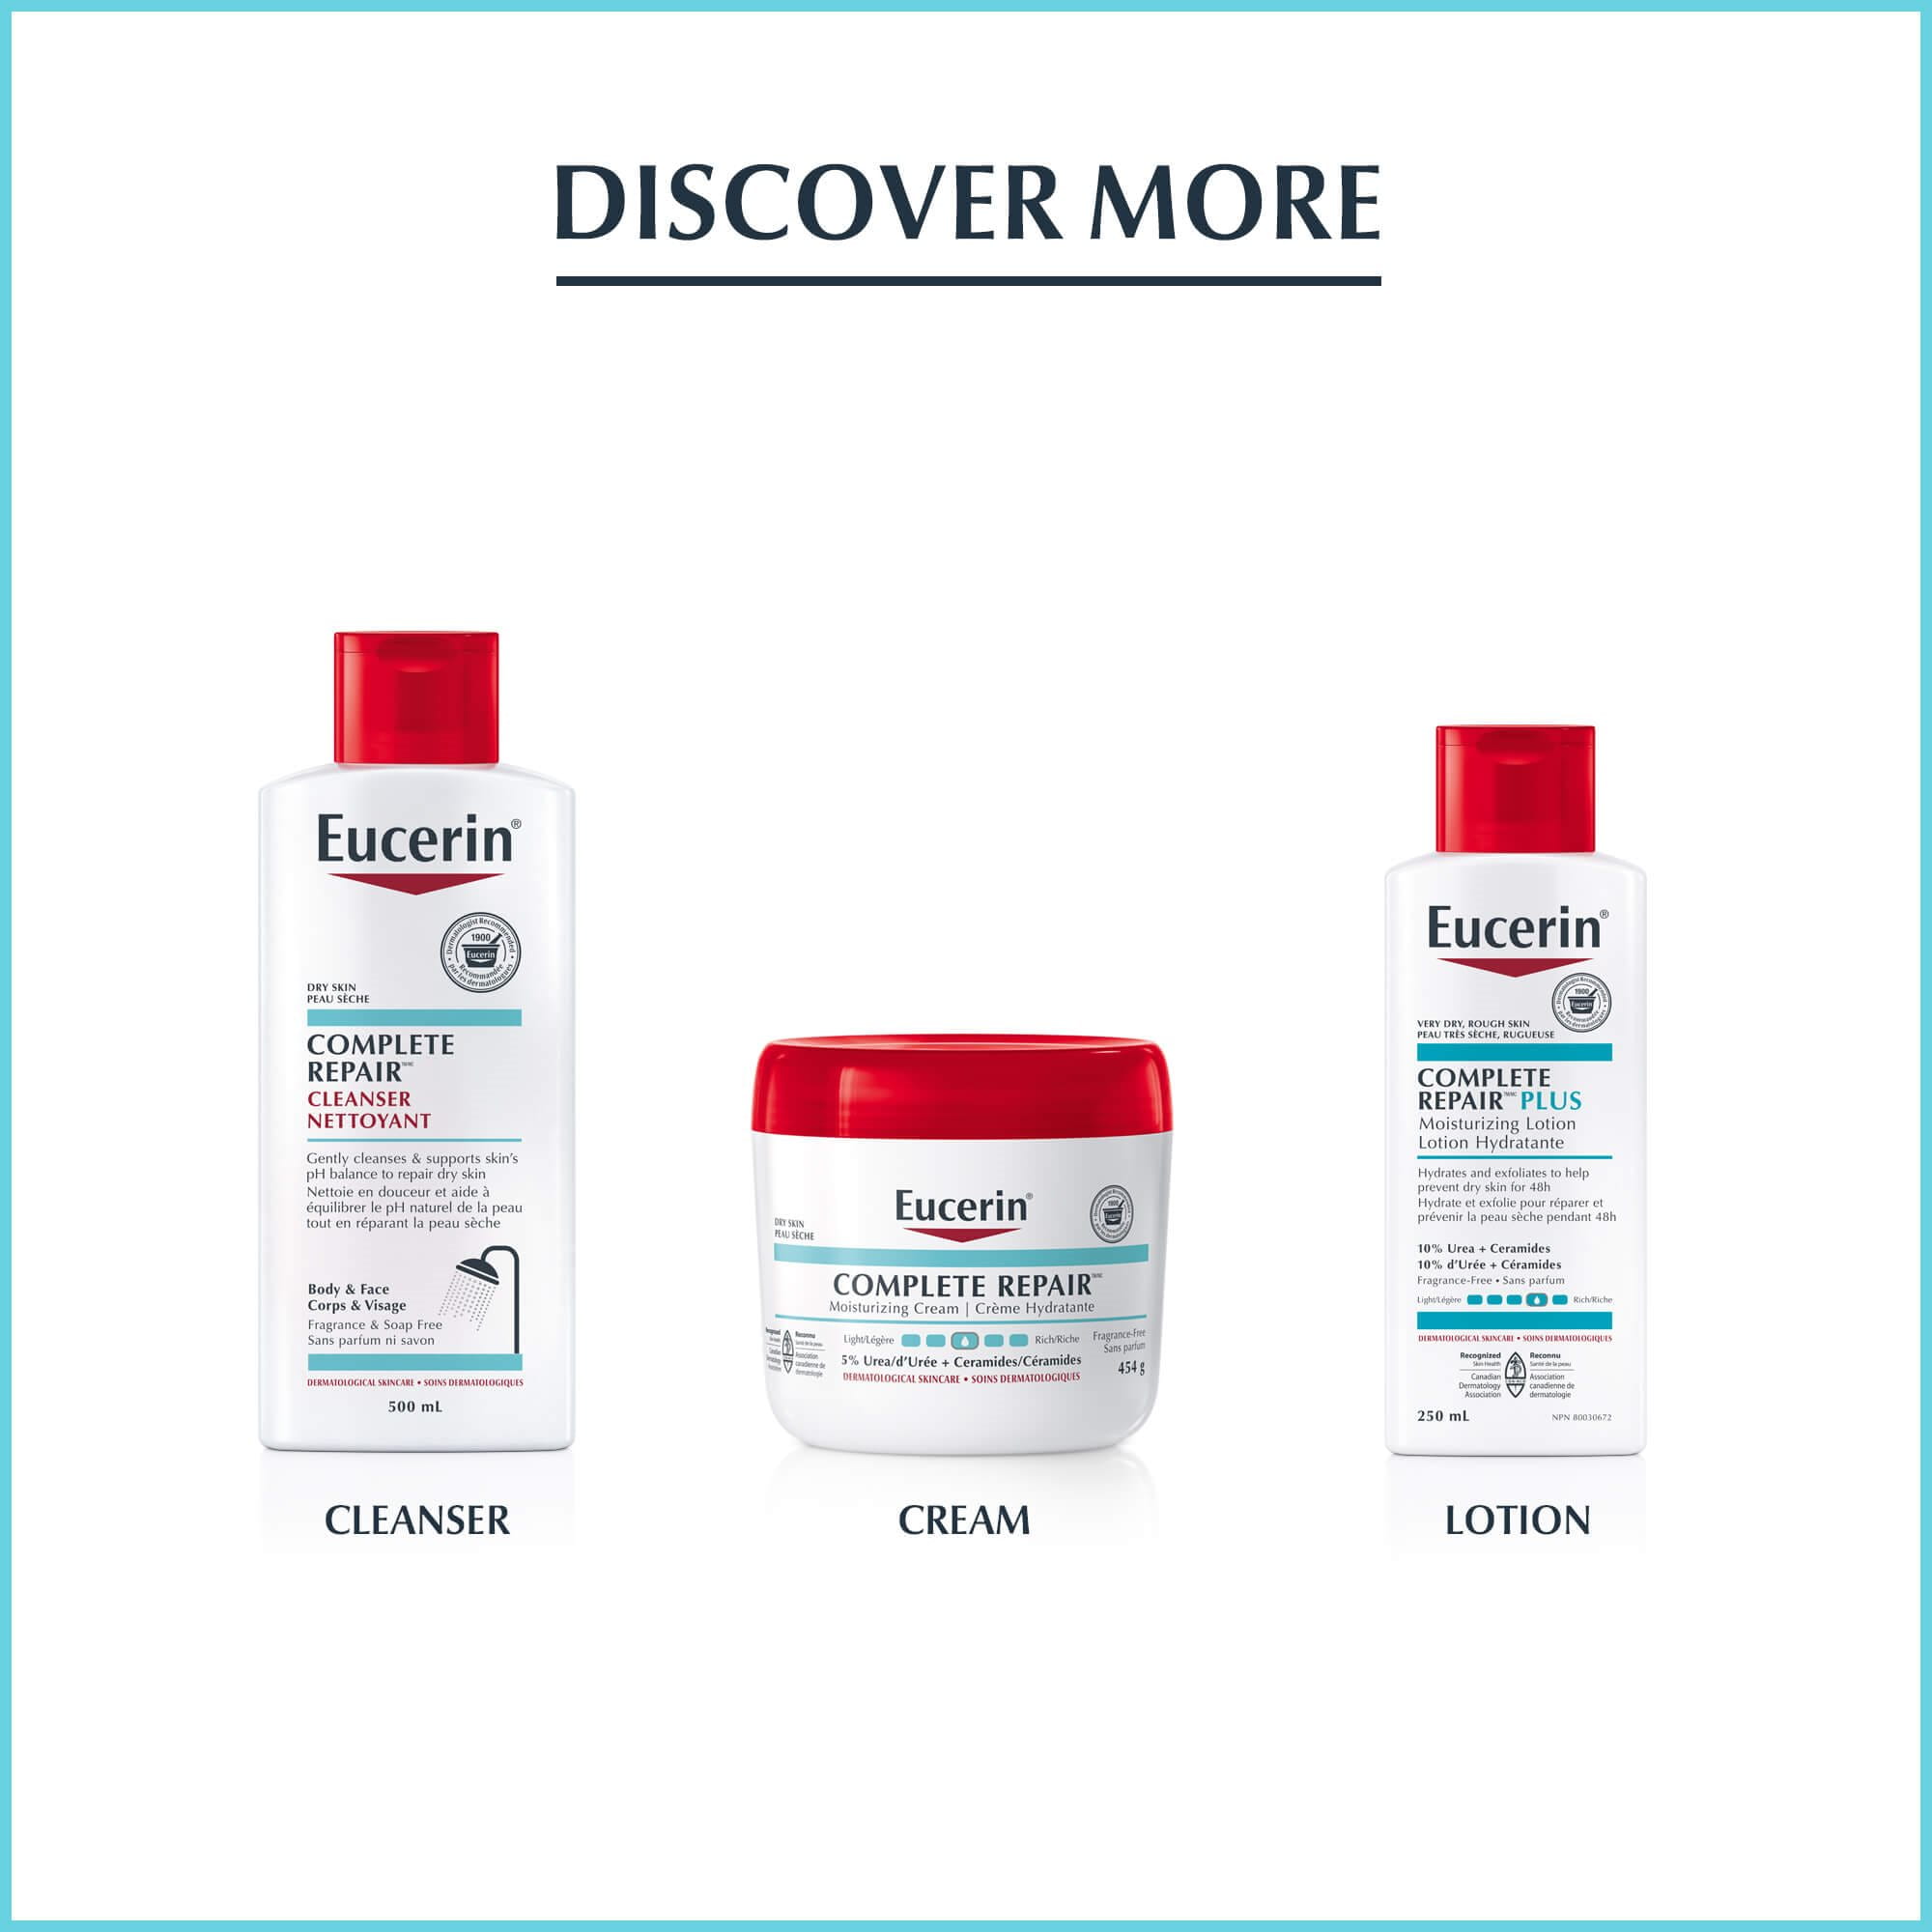 Image of the Eucerin cleanser, cream and lotion from the Complete Repair line. 